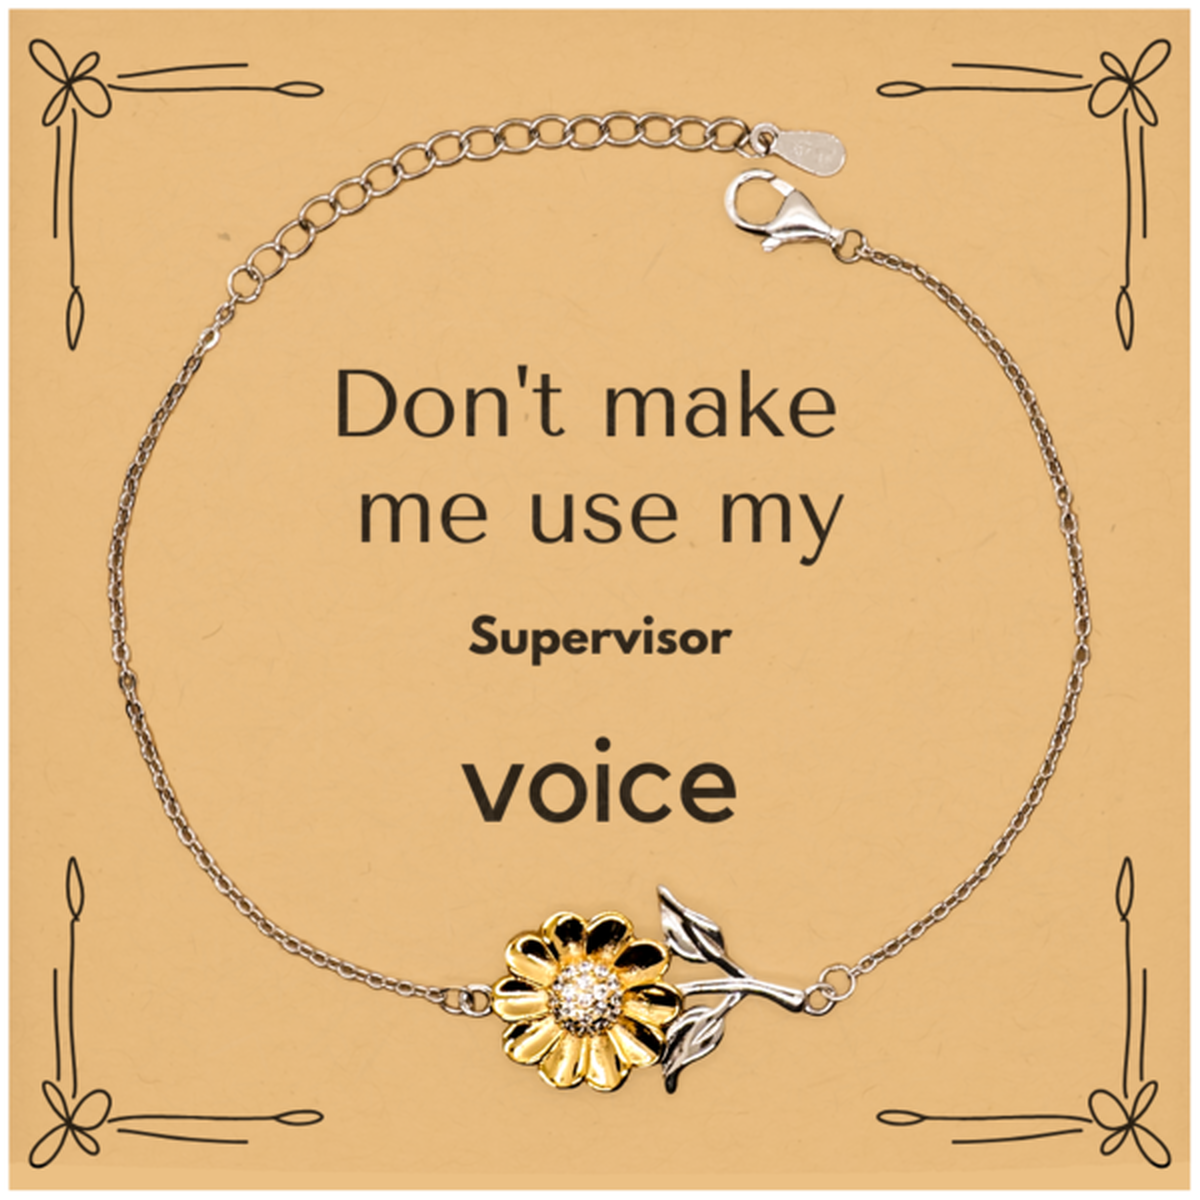 Don't make me use my Supervisor voice, Sarcasm Supervisor Card Gifts, Christmas Supervisor Sunflower Bracelet Birthday Unique Gifts For Supervisor Coworkers, Men, Women, Colleague, Friends